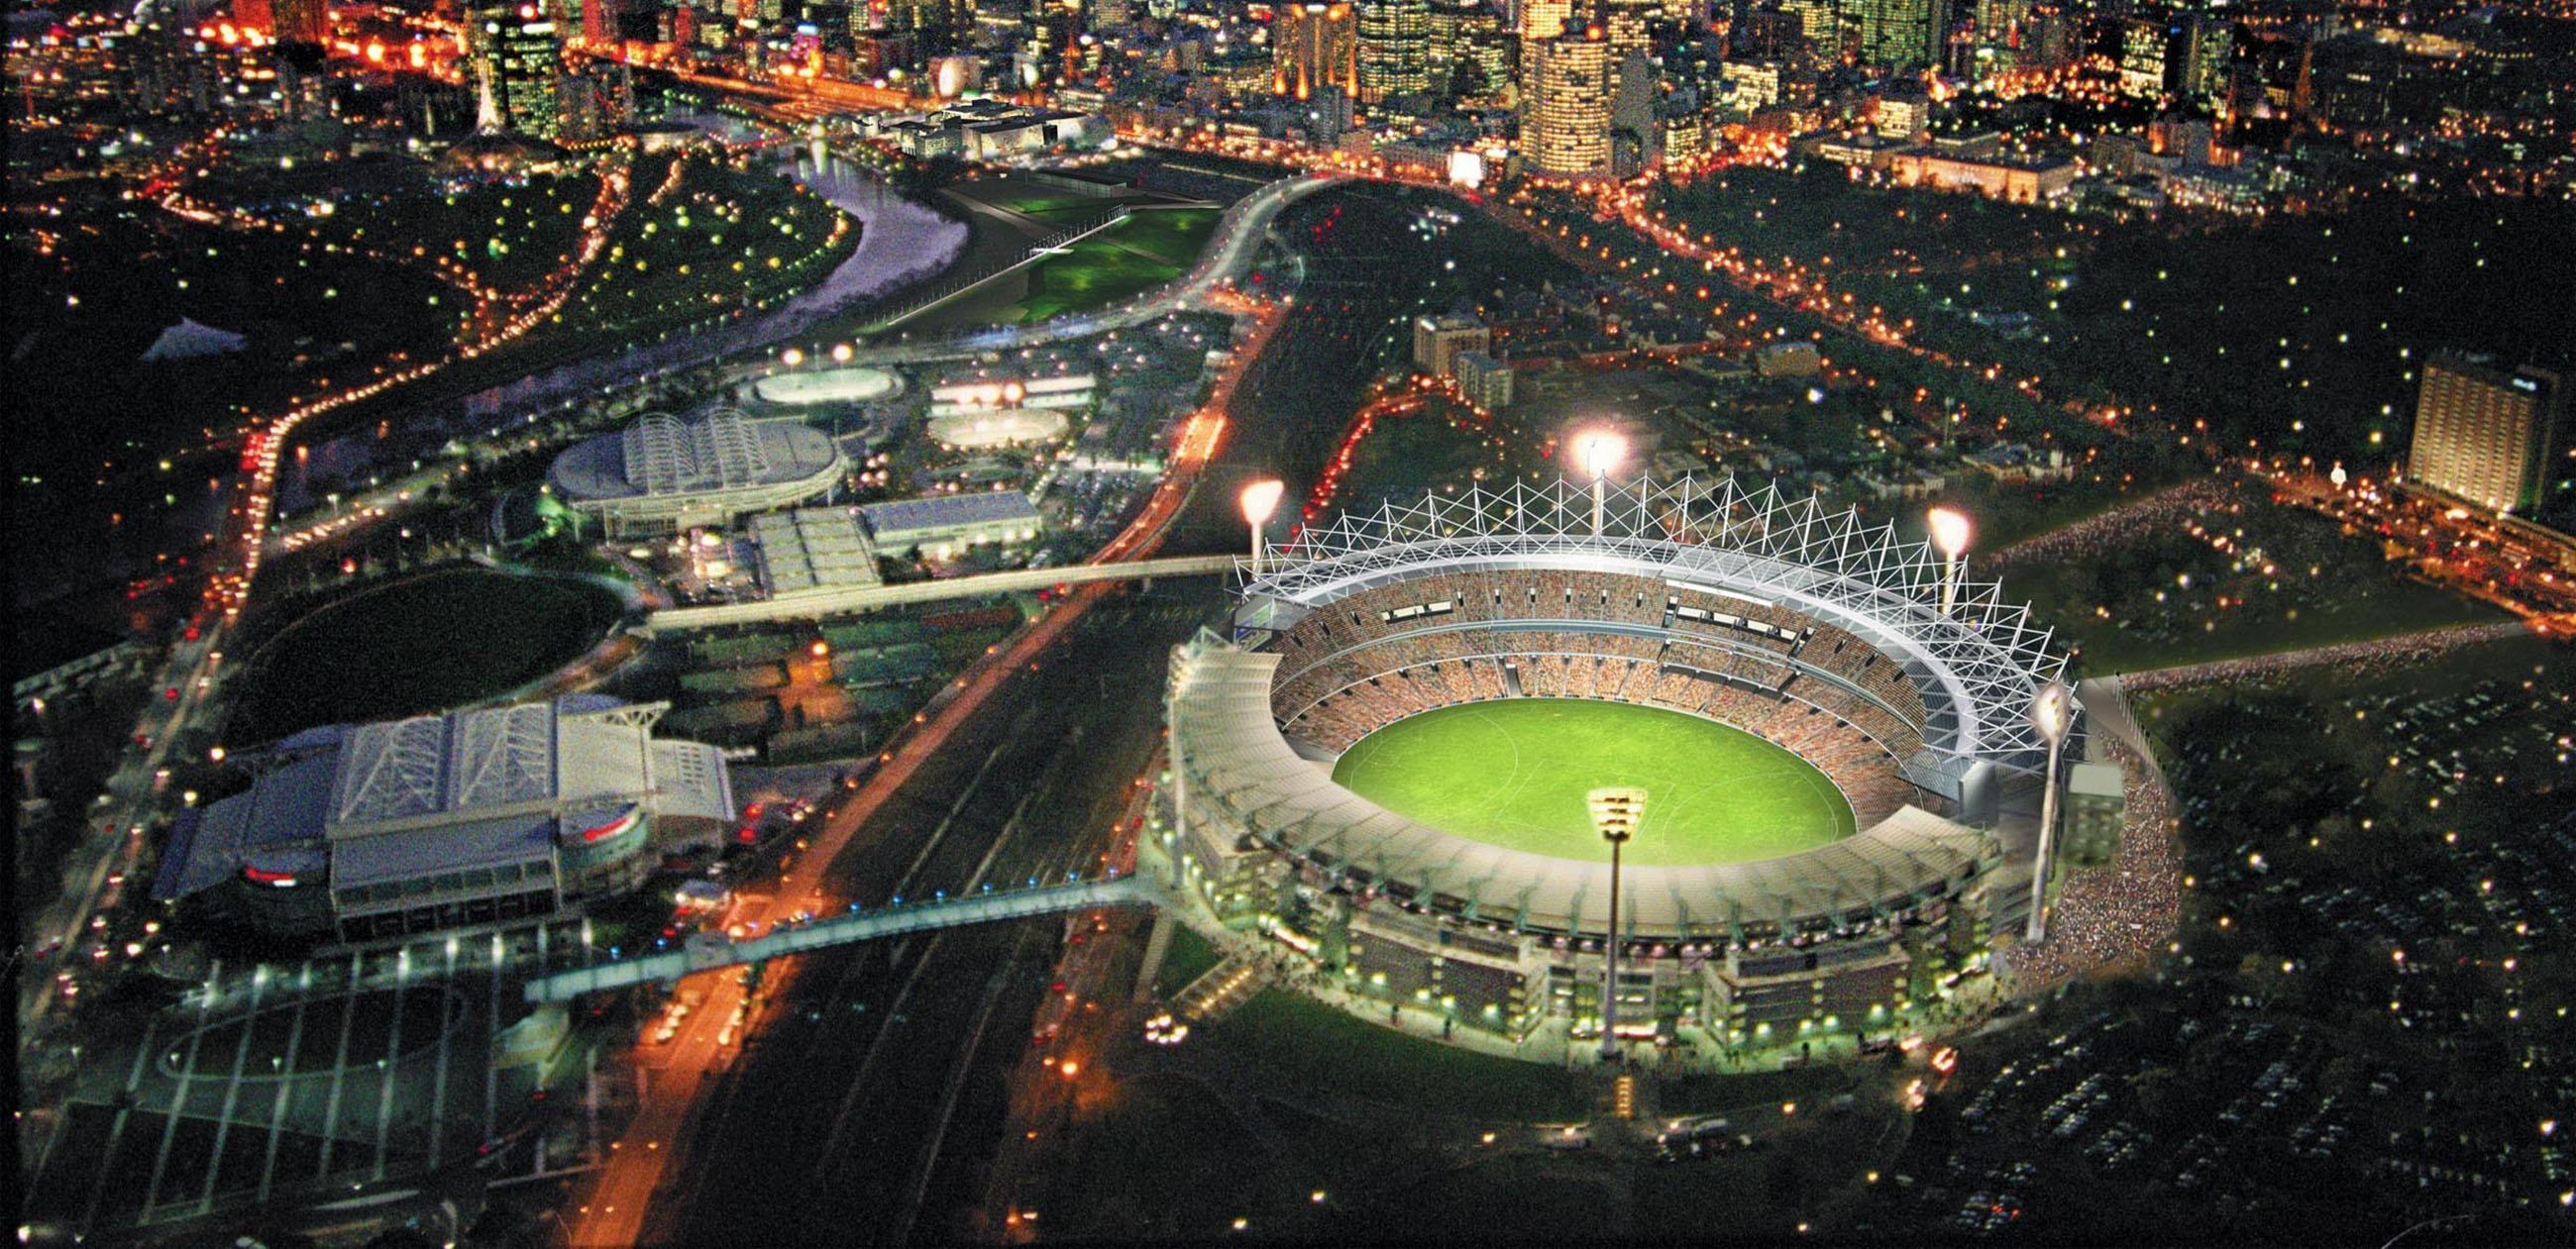 The Melbourne Cricket Ground,things to do in Australia